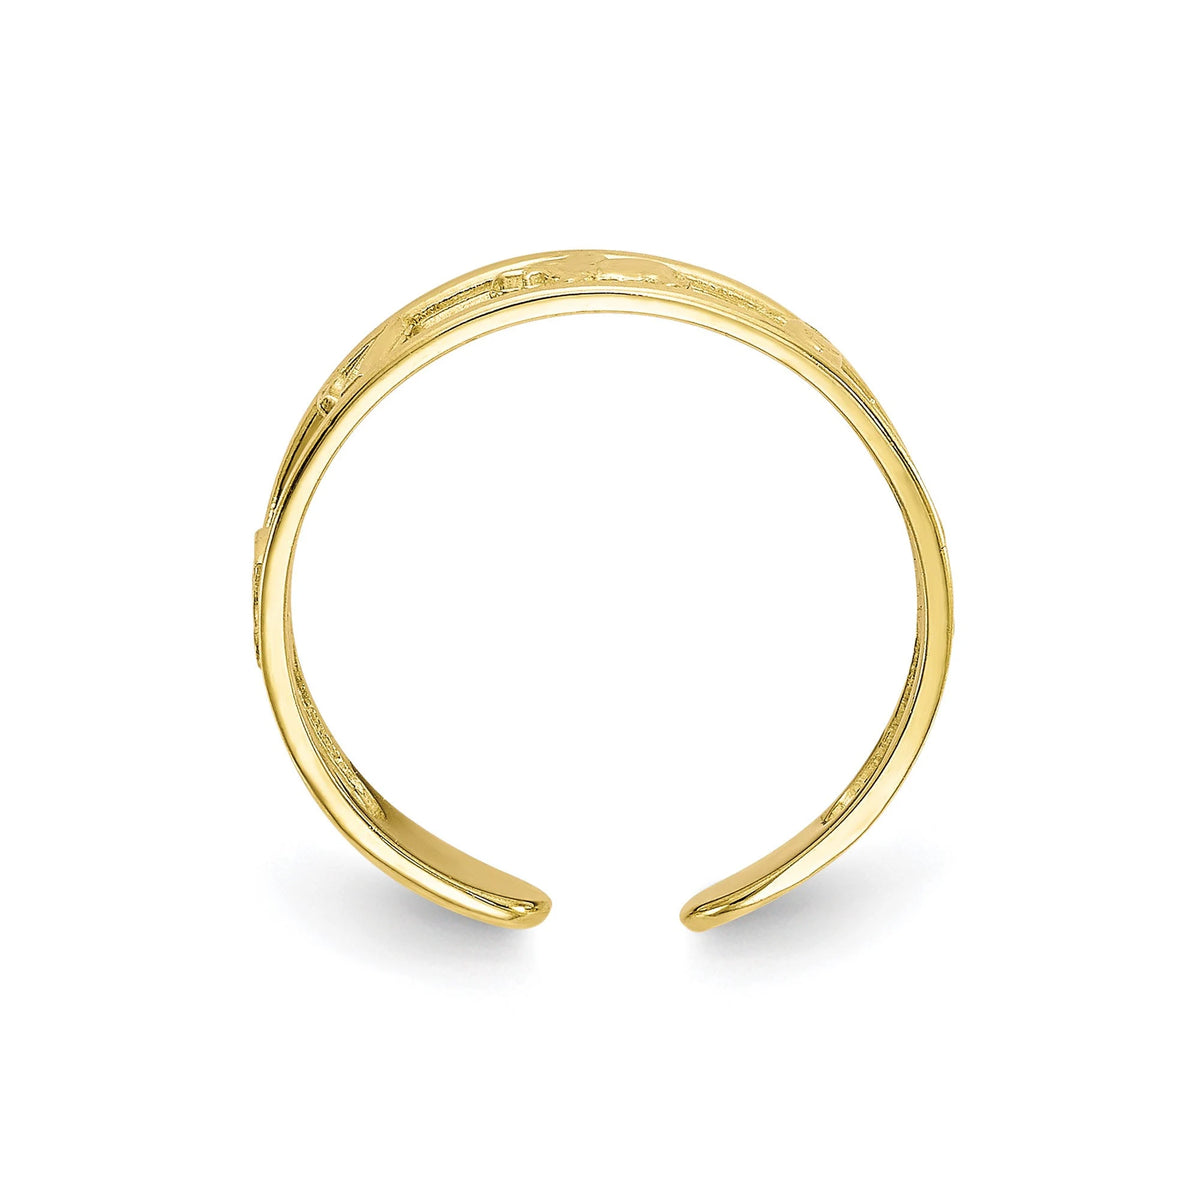 10k Lucky Yellow Gold Solid Toe Ring 5mm Band- Gift Box Included - Made in USA - All Things Lucky Toe Ring